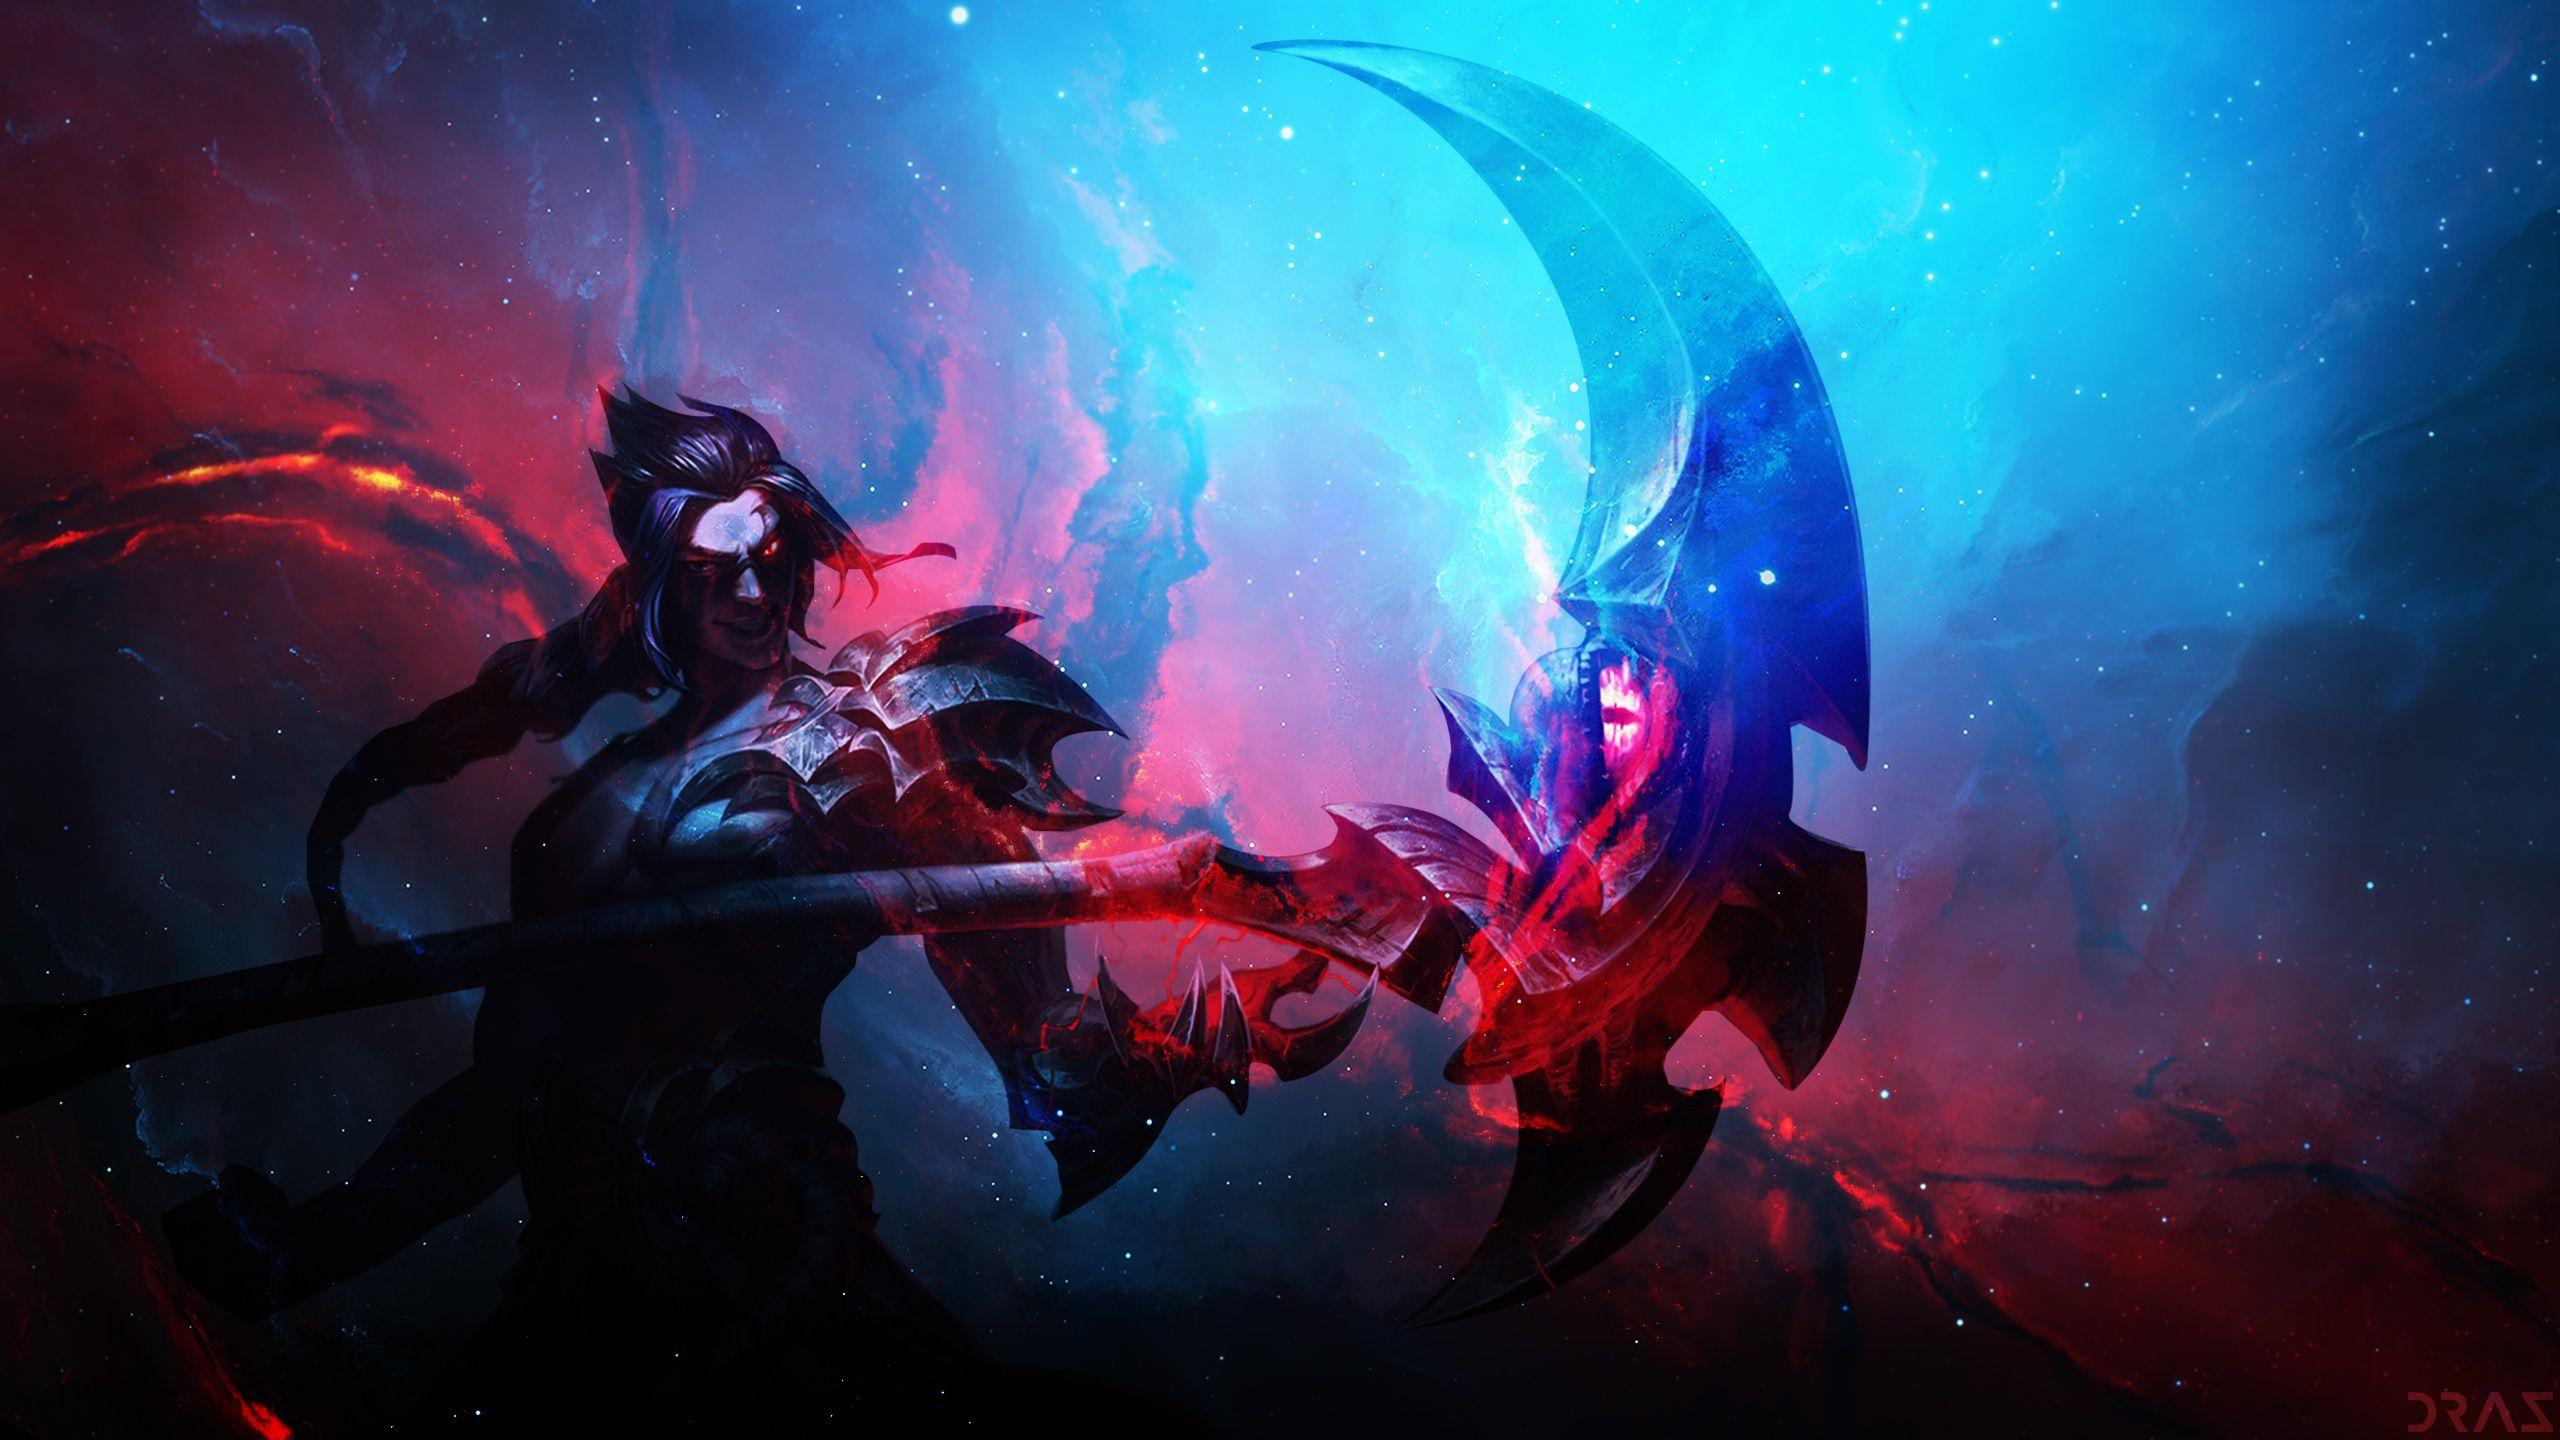 League of Legends HD Wallpapers - Top Free League of Legends HD Backgrounds  - WallpaperAccess